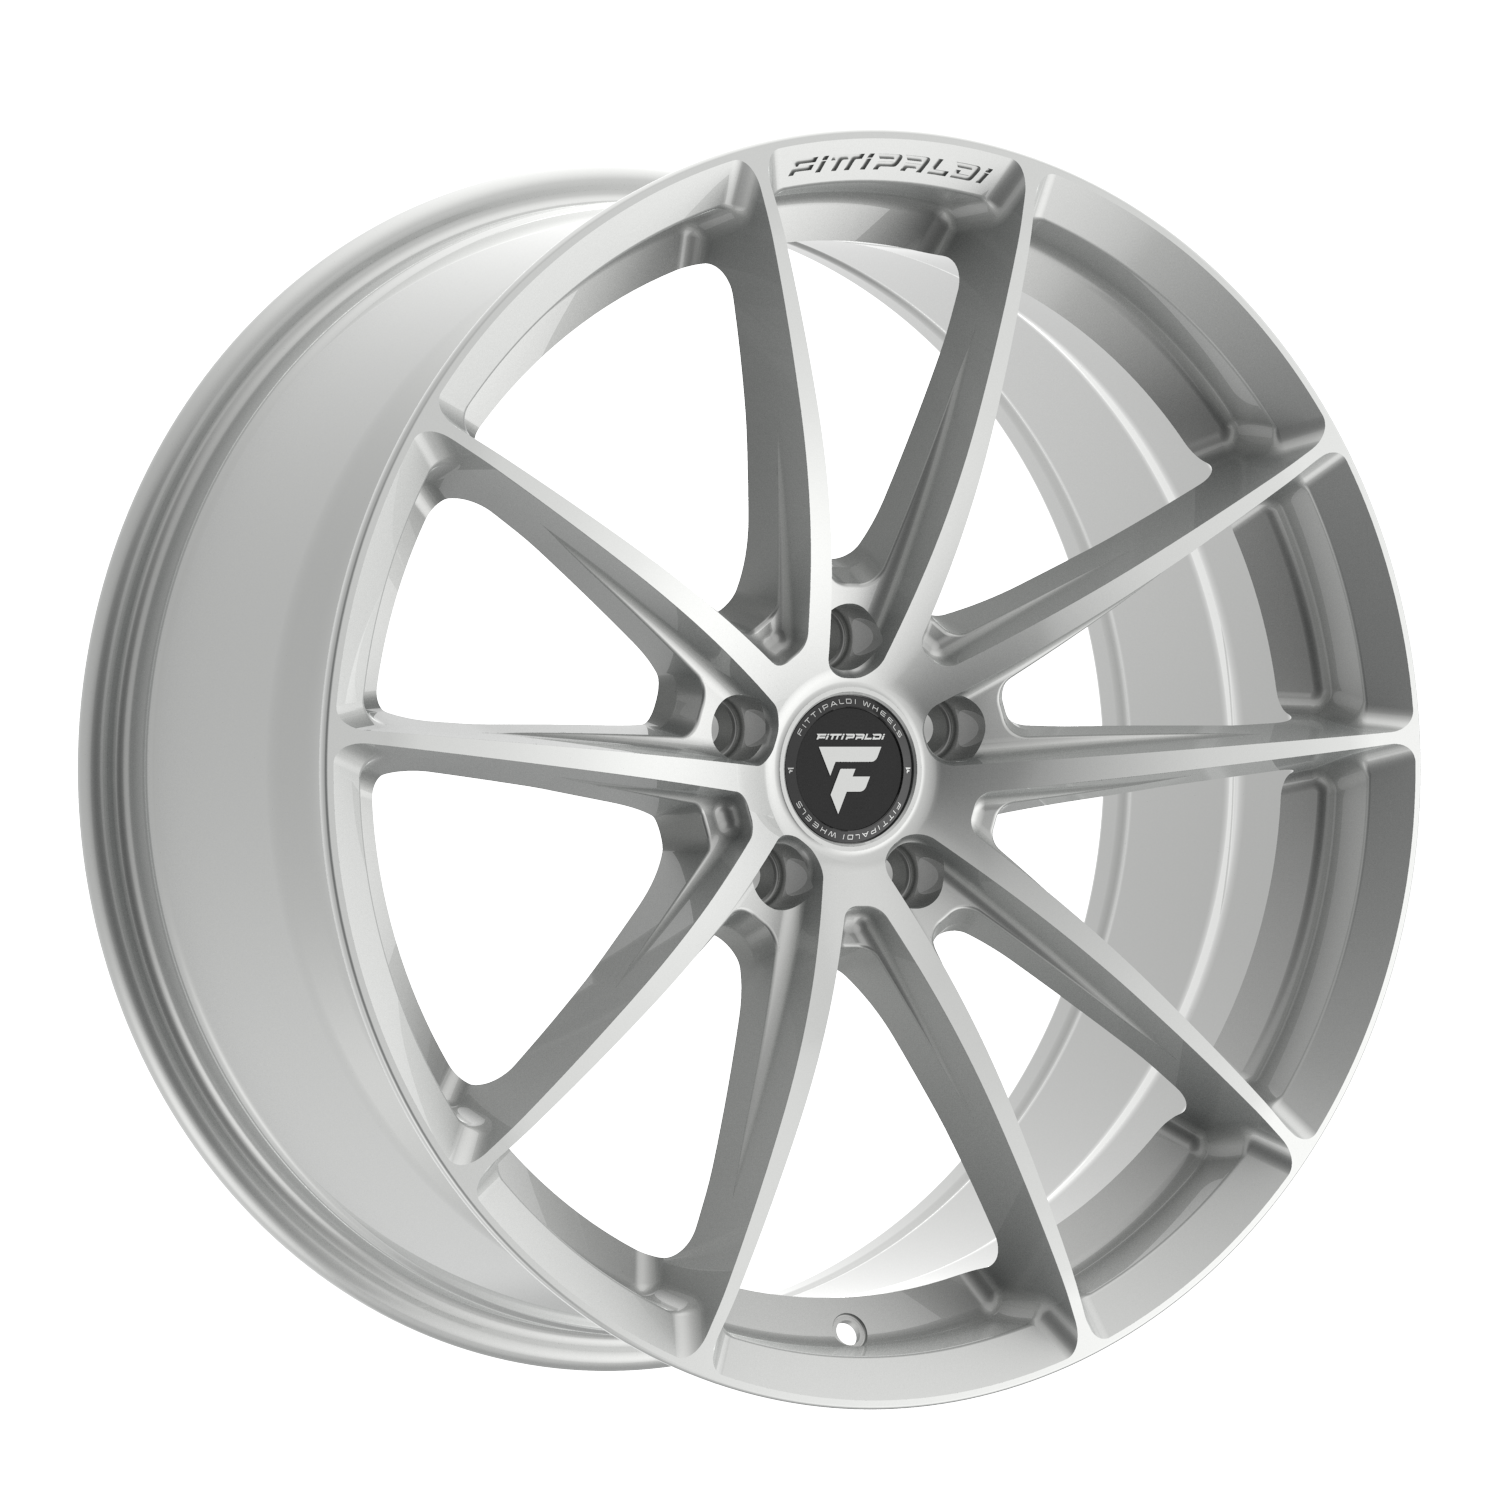 FITTIPALDI 362S 20X8.5 +32 5X120 Brushed Silver